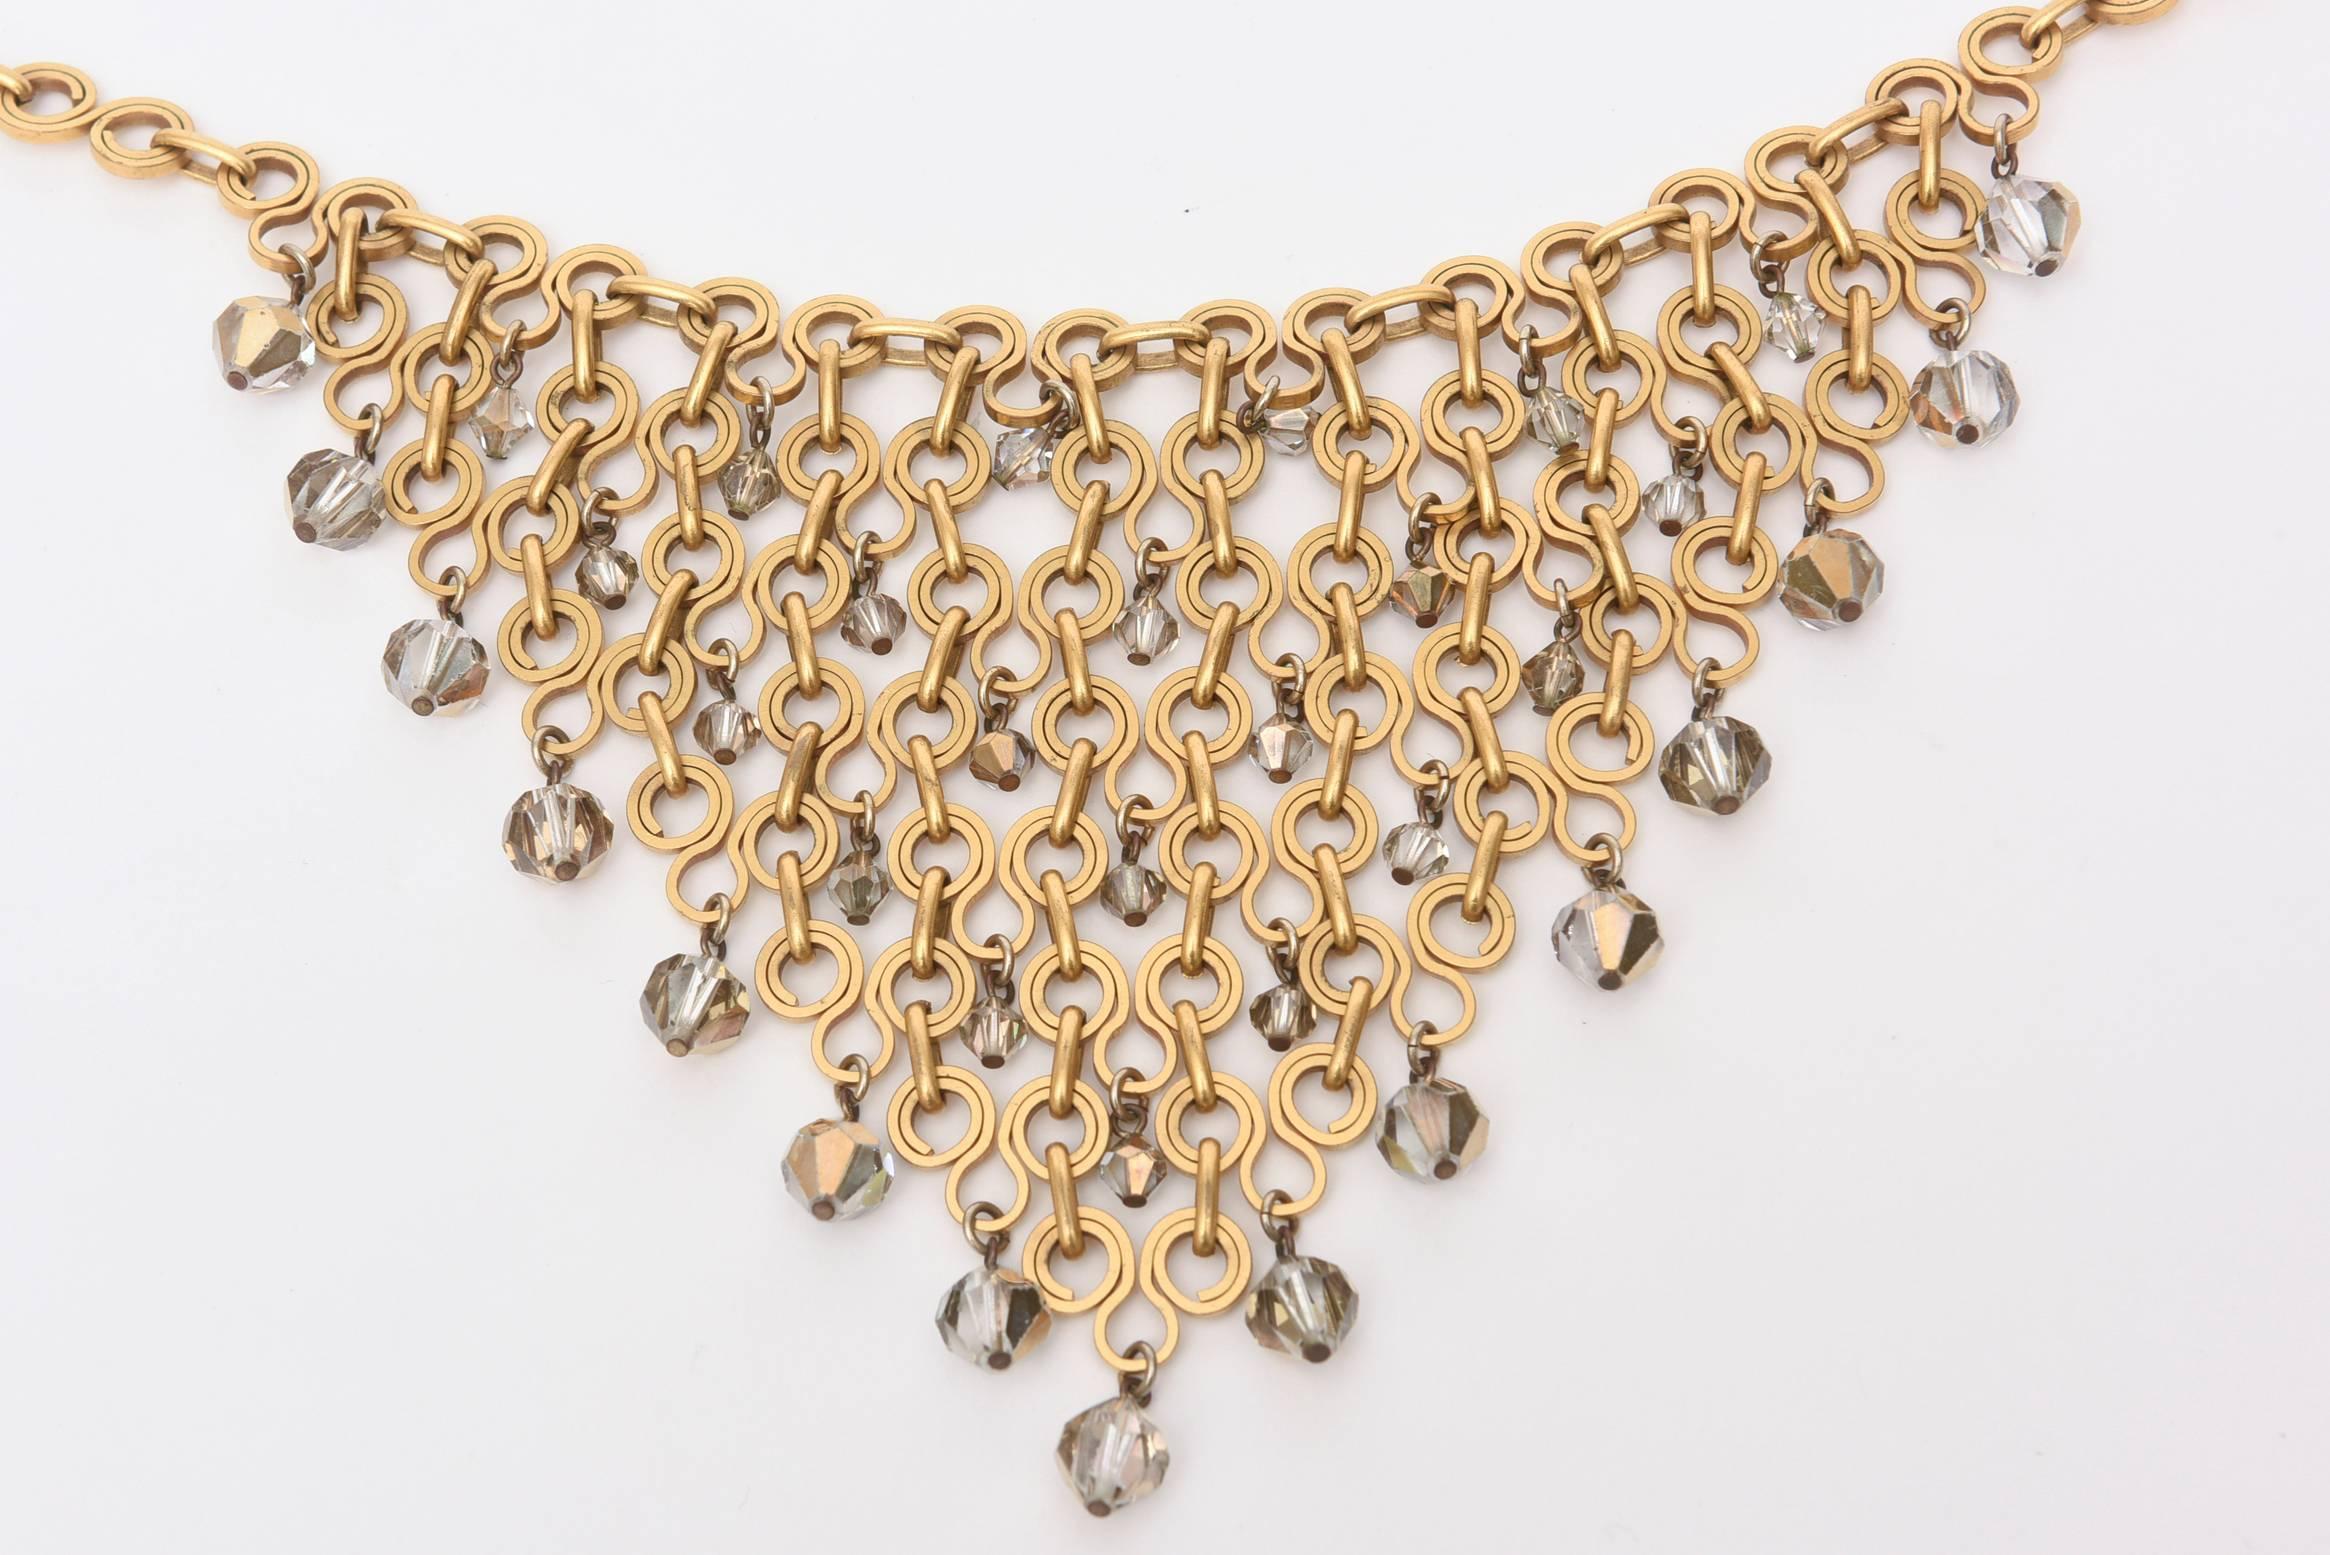 Swarovski Faceted Crystal Gray Bib Necklace French Vintage Paco Rabanne Attrib. In Good Condition For Sale In North Miami, FL